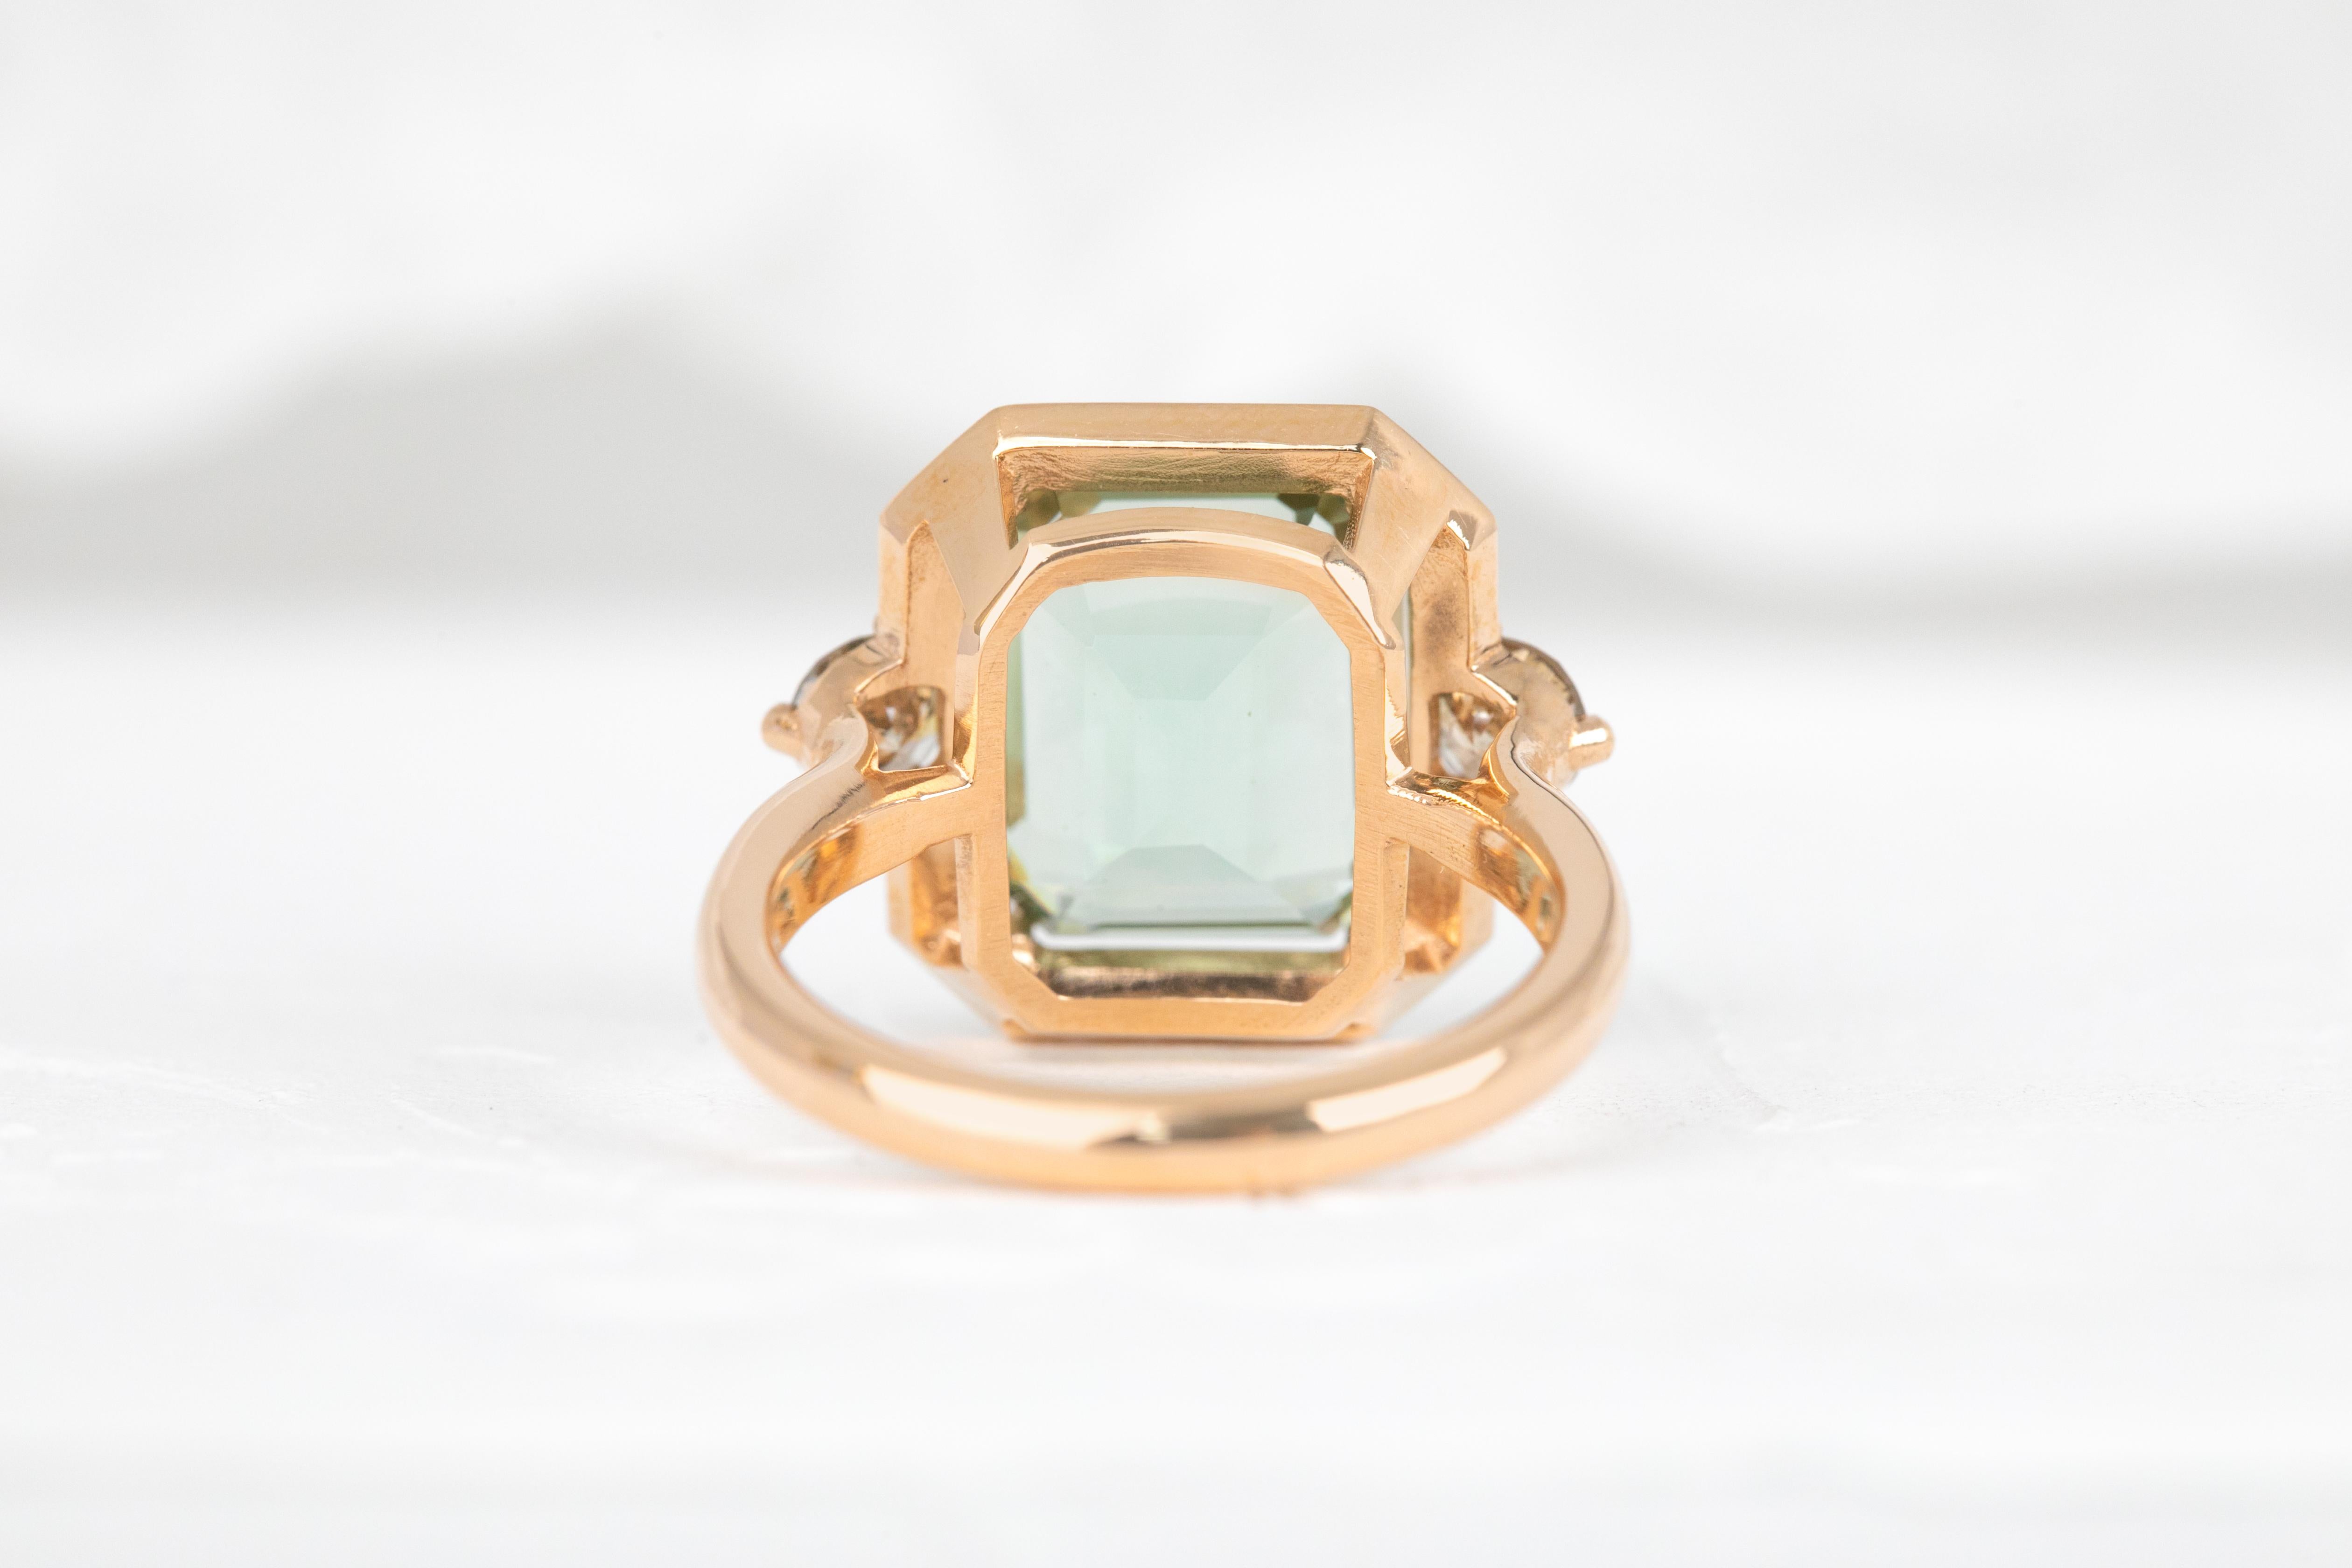 For Sale:  14k Gold Art Deco Ring, 5.67ct Green Amethyst Ring and 0.54 Cognac Diamond Ring 4